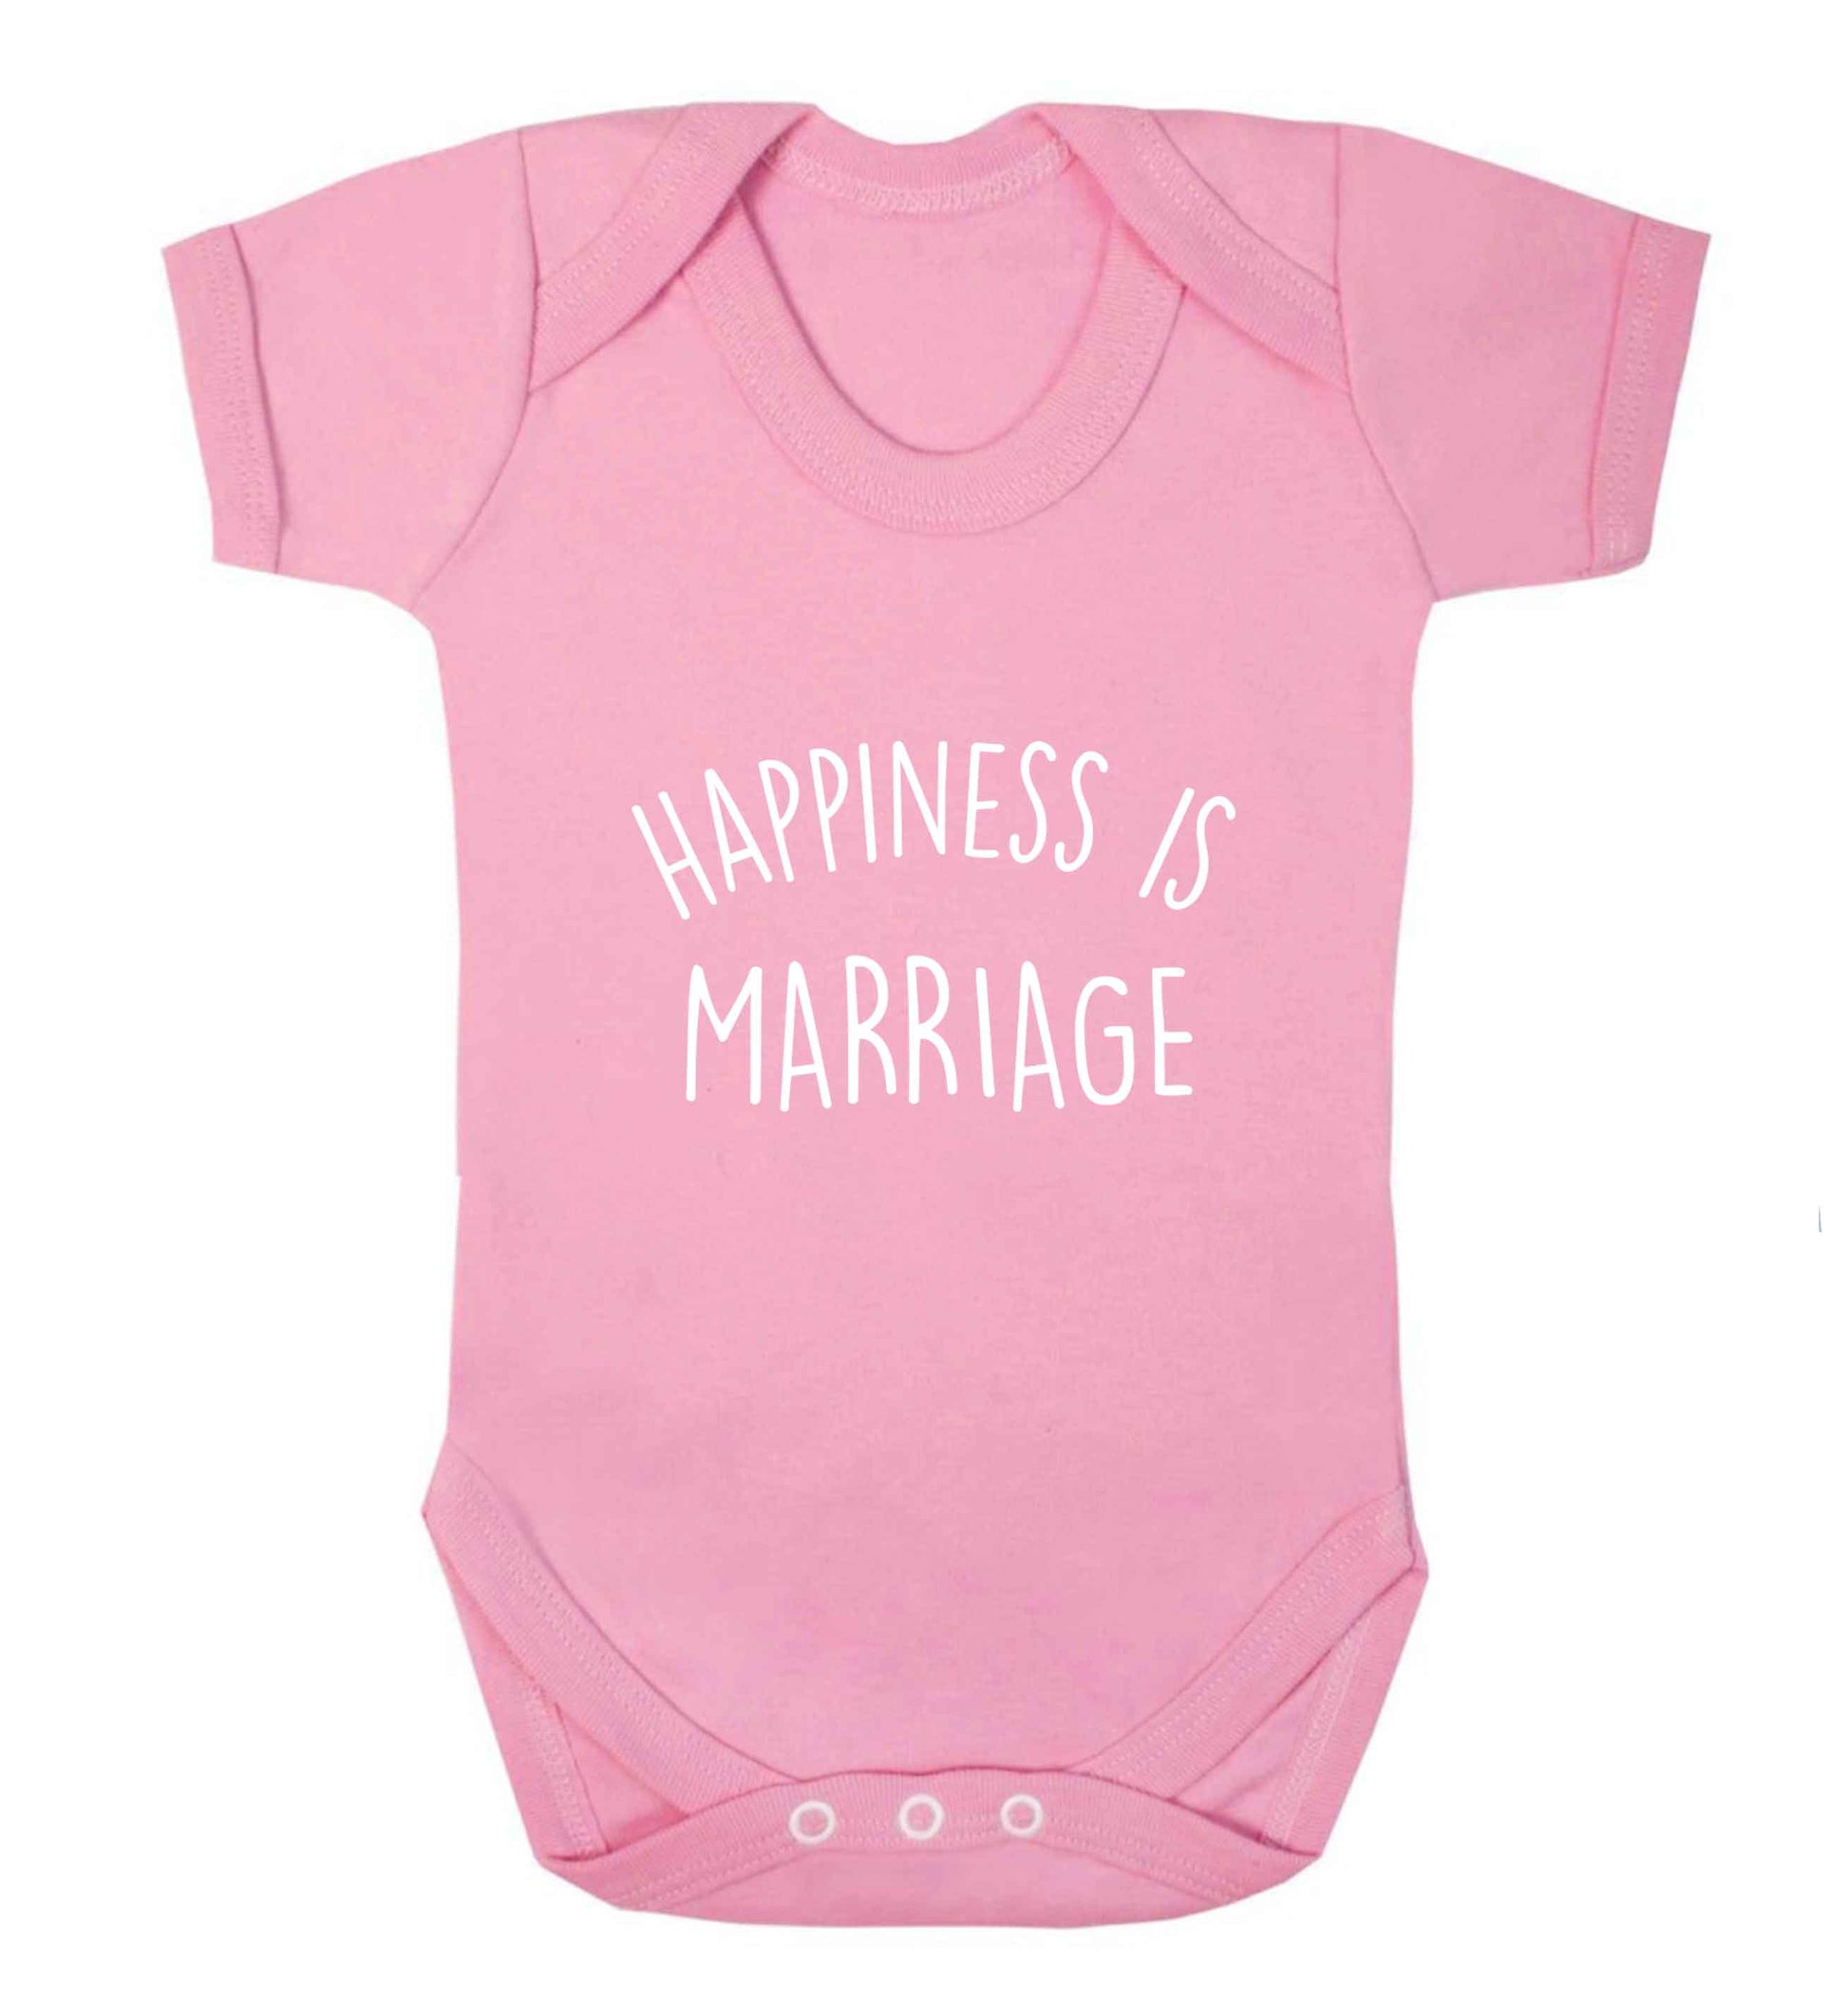 Happiness is marriage baby vest pale pink 18-24 months